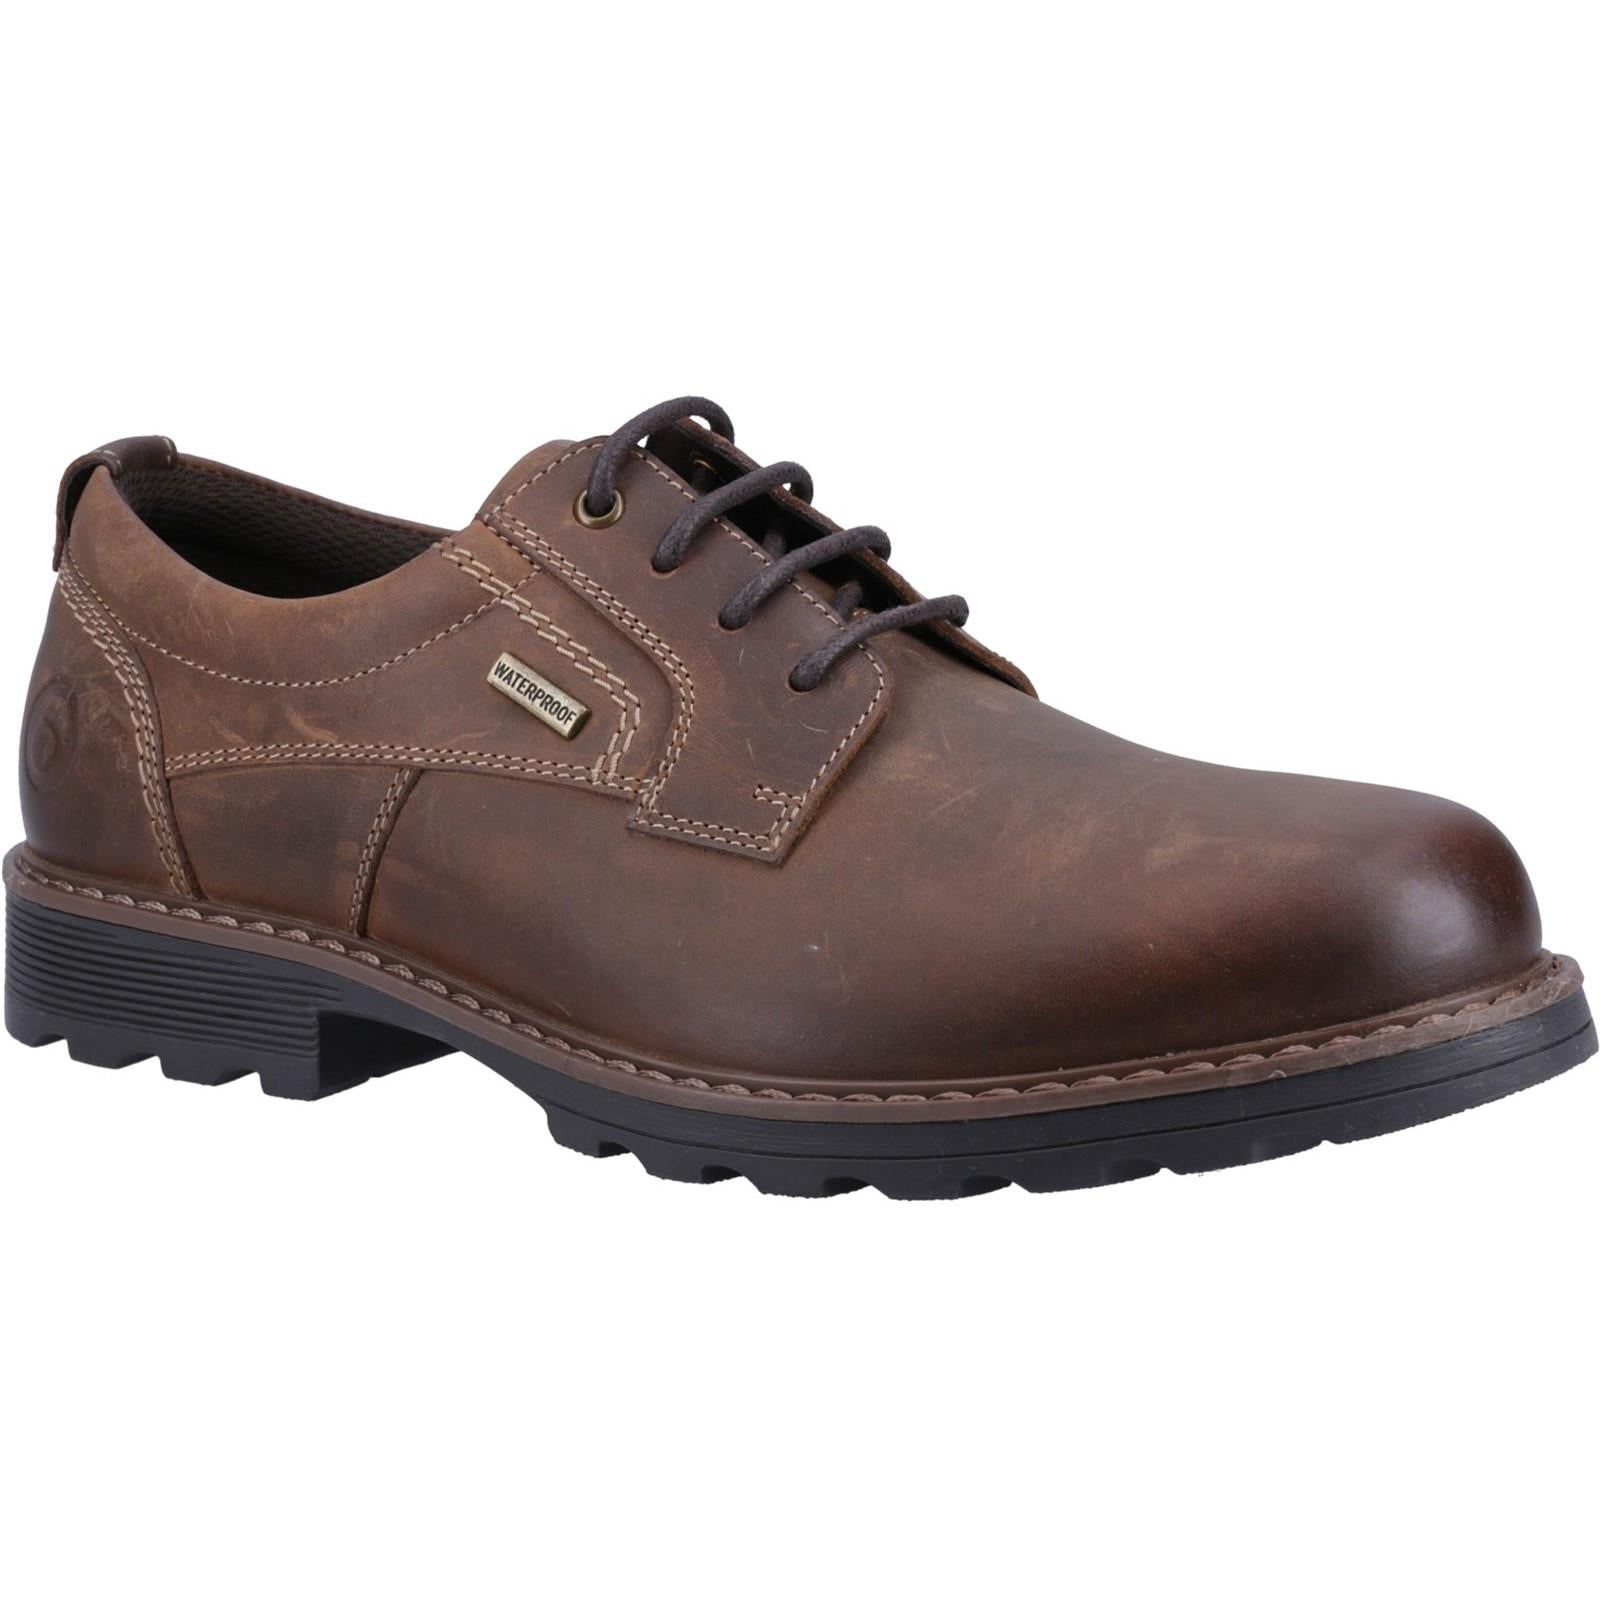 Cotswold Tadwick dark tan leather waterproof lace up shoes